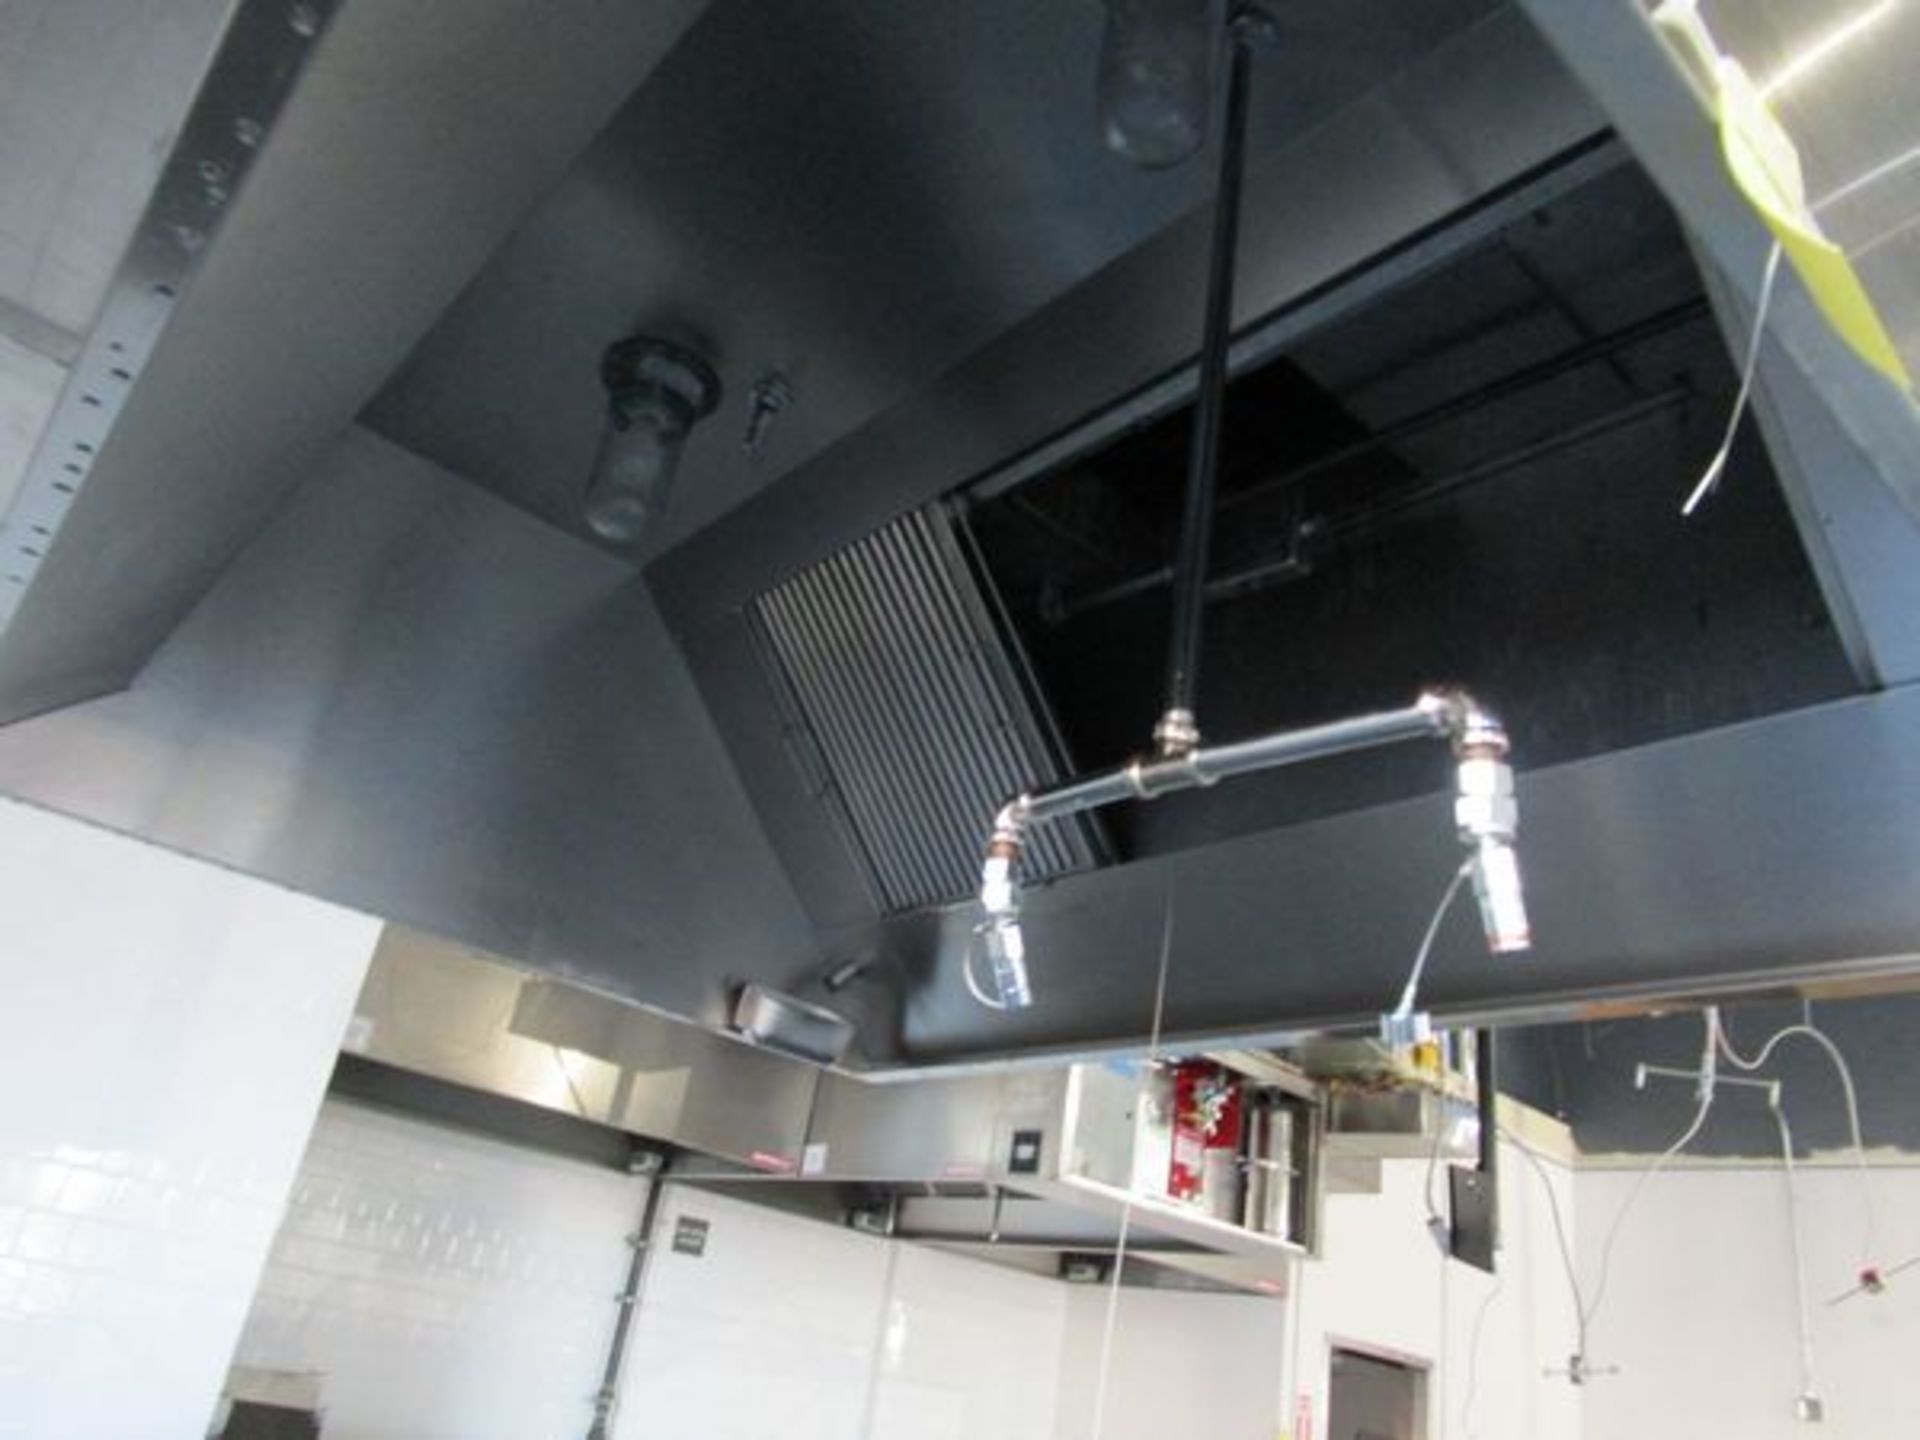 Captive Aire Exhaust Hoods, Approx. 4'x5' Each w/ Fire System, Hood Only, No Exhaust Blower - Image 4 of 4